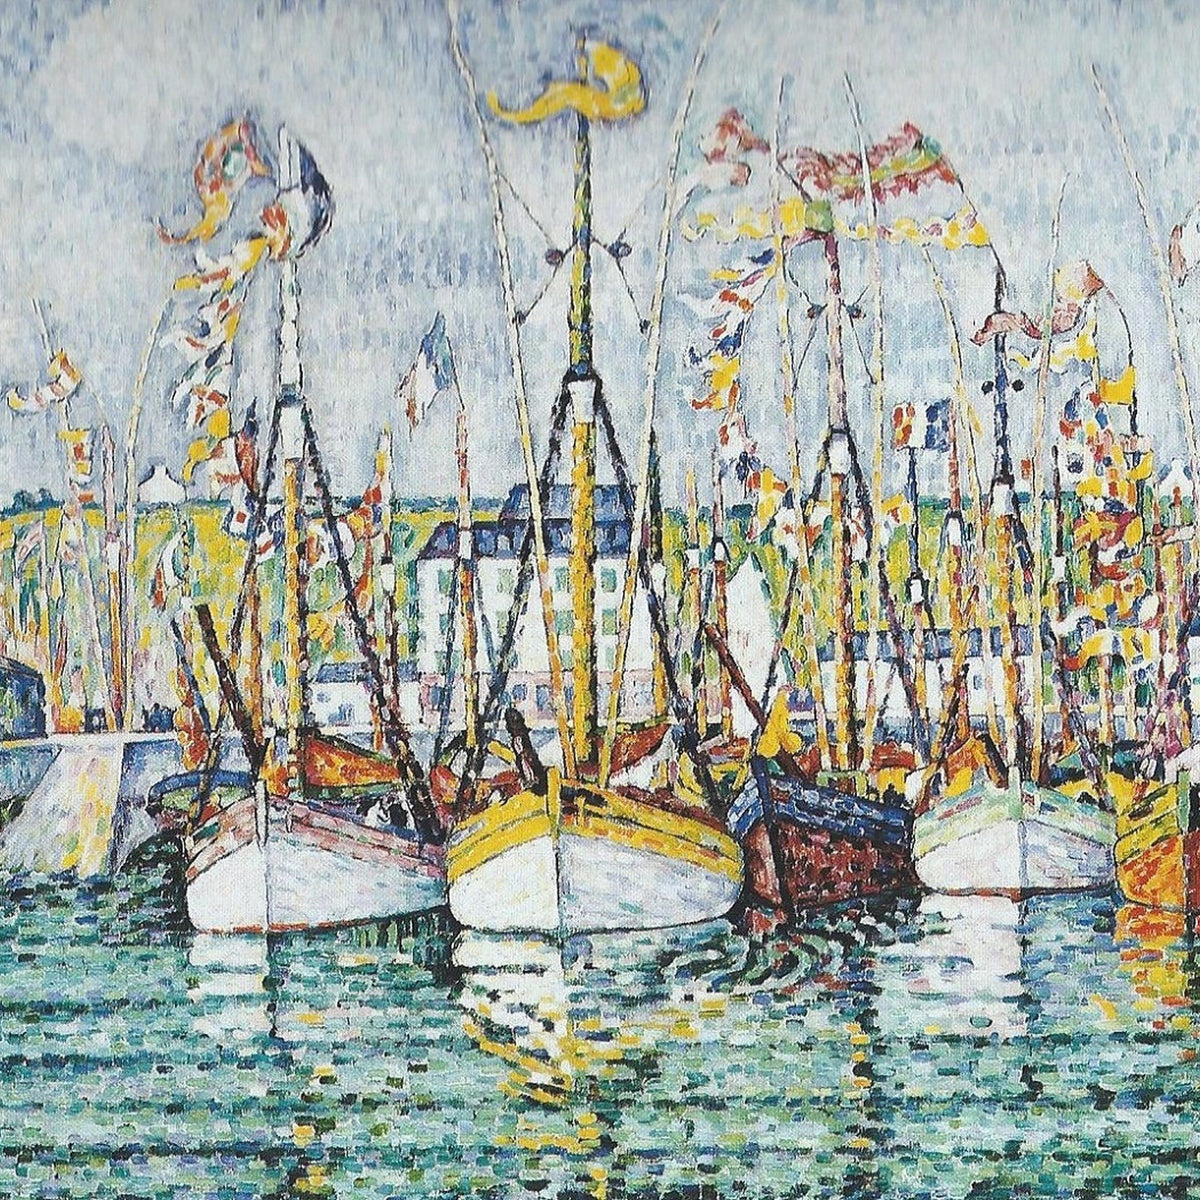 Blessing of the Tuna Boats at Groix - Diamond Painting-Diamond Painting-16"x20" (40x50cm)-Canvas by Numbers US